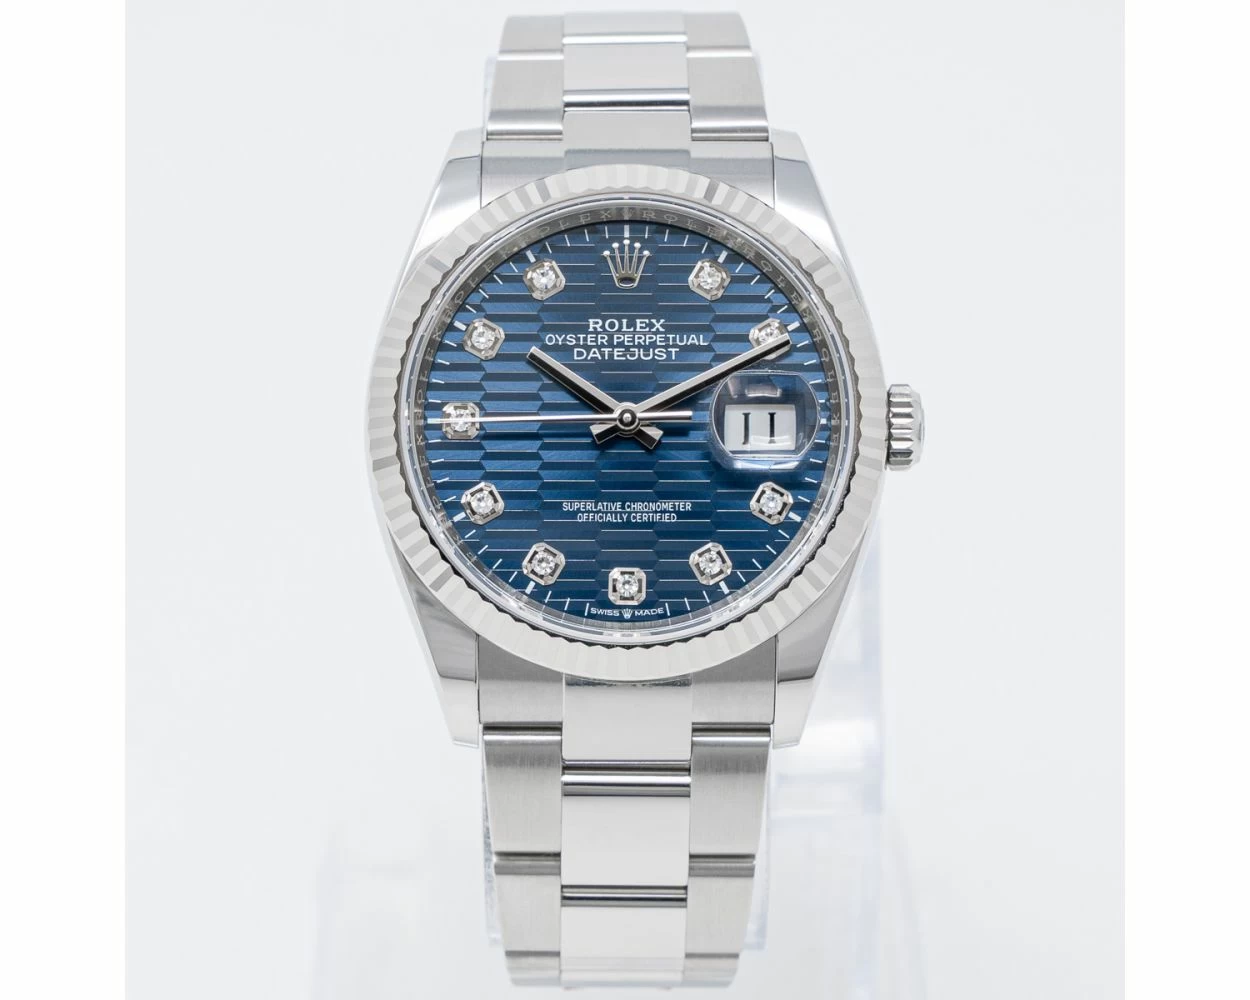 Buy Genuine Used Rolex Datejust 36 126234 Watch - Bright Blue Fluted Motif  Dial